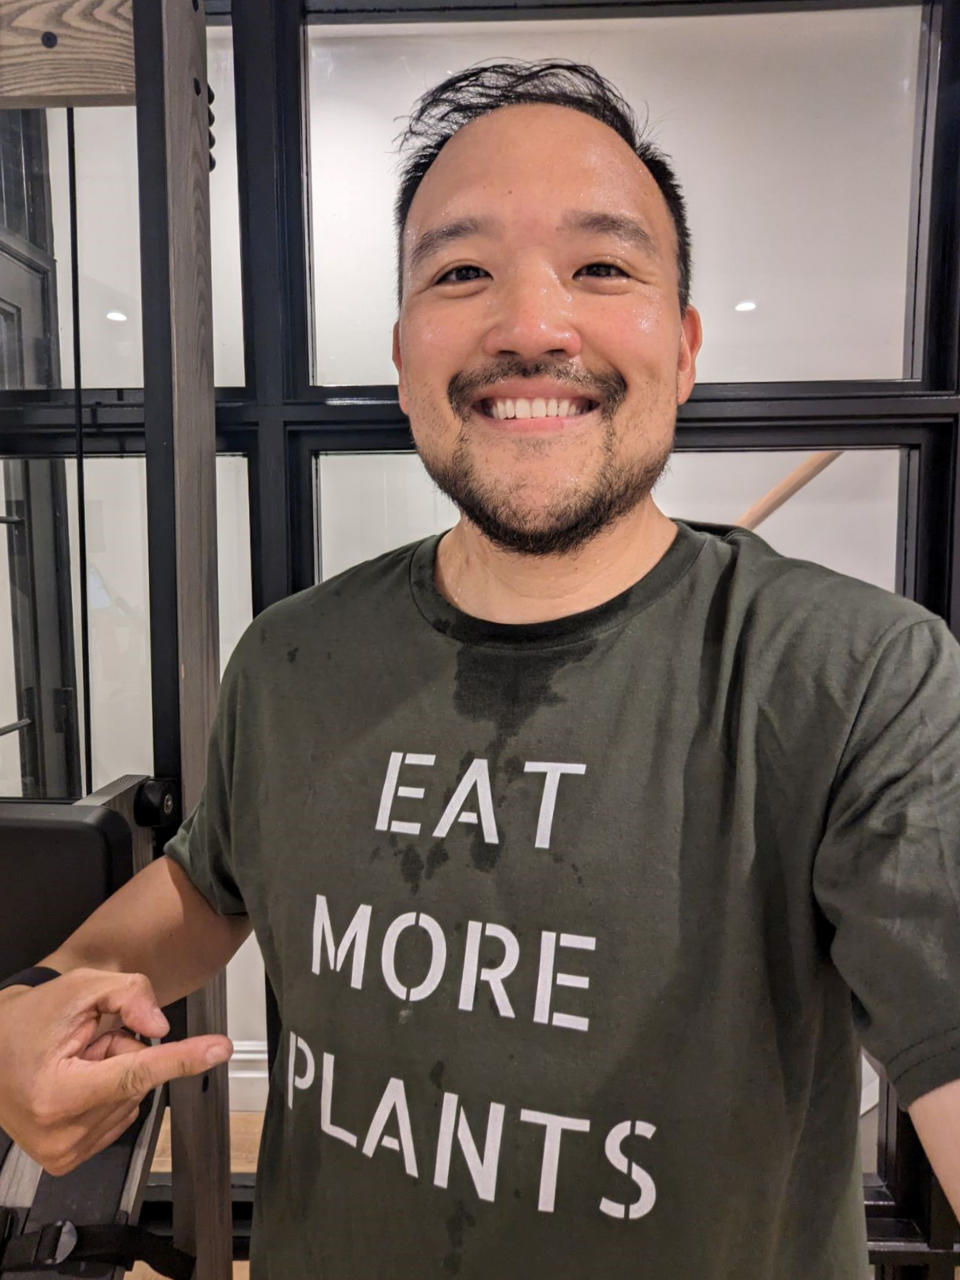 More than a year ago, Peter Sunwoo transitioned to a mostly plant-based diet. He increased the amount he exercised, too, to lose some weight. (Courtesy Peter Sunwoo)